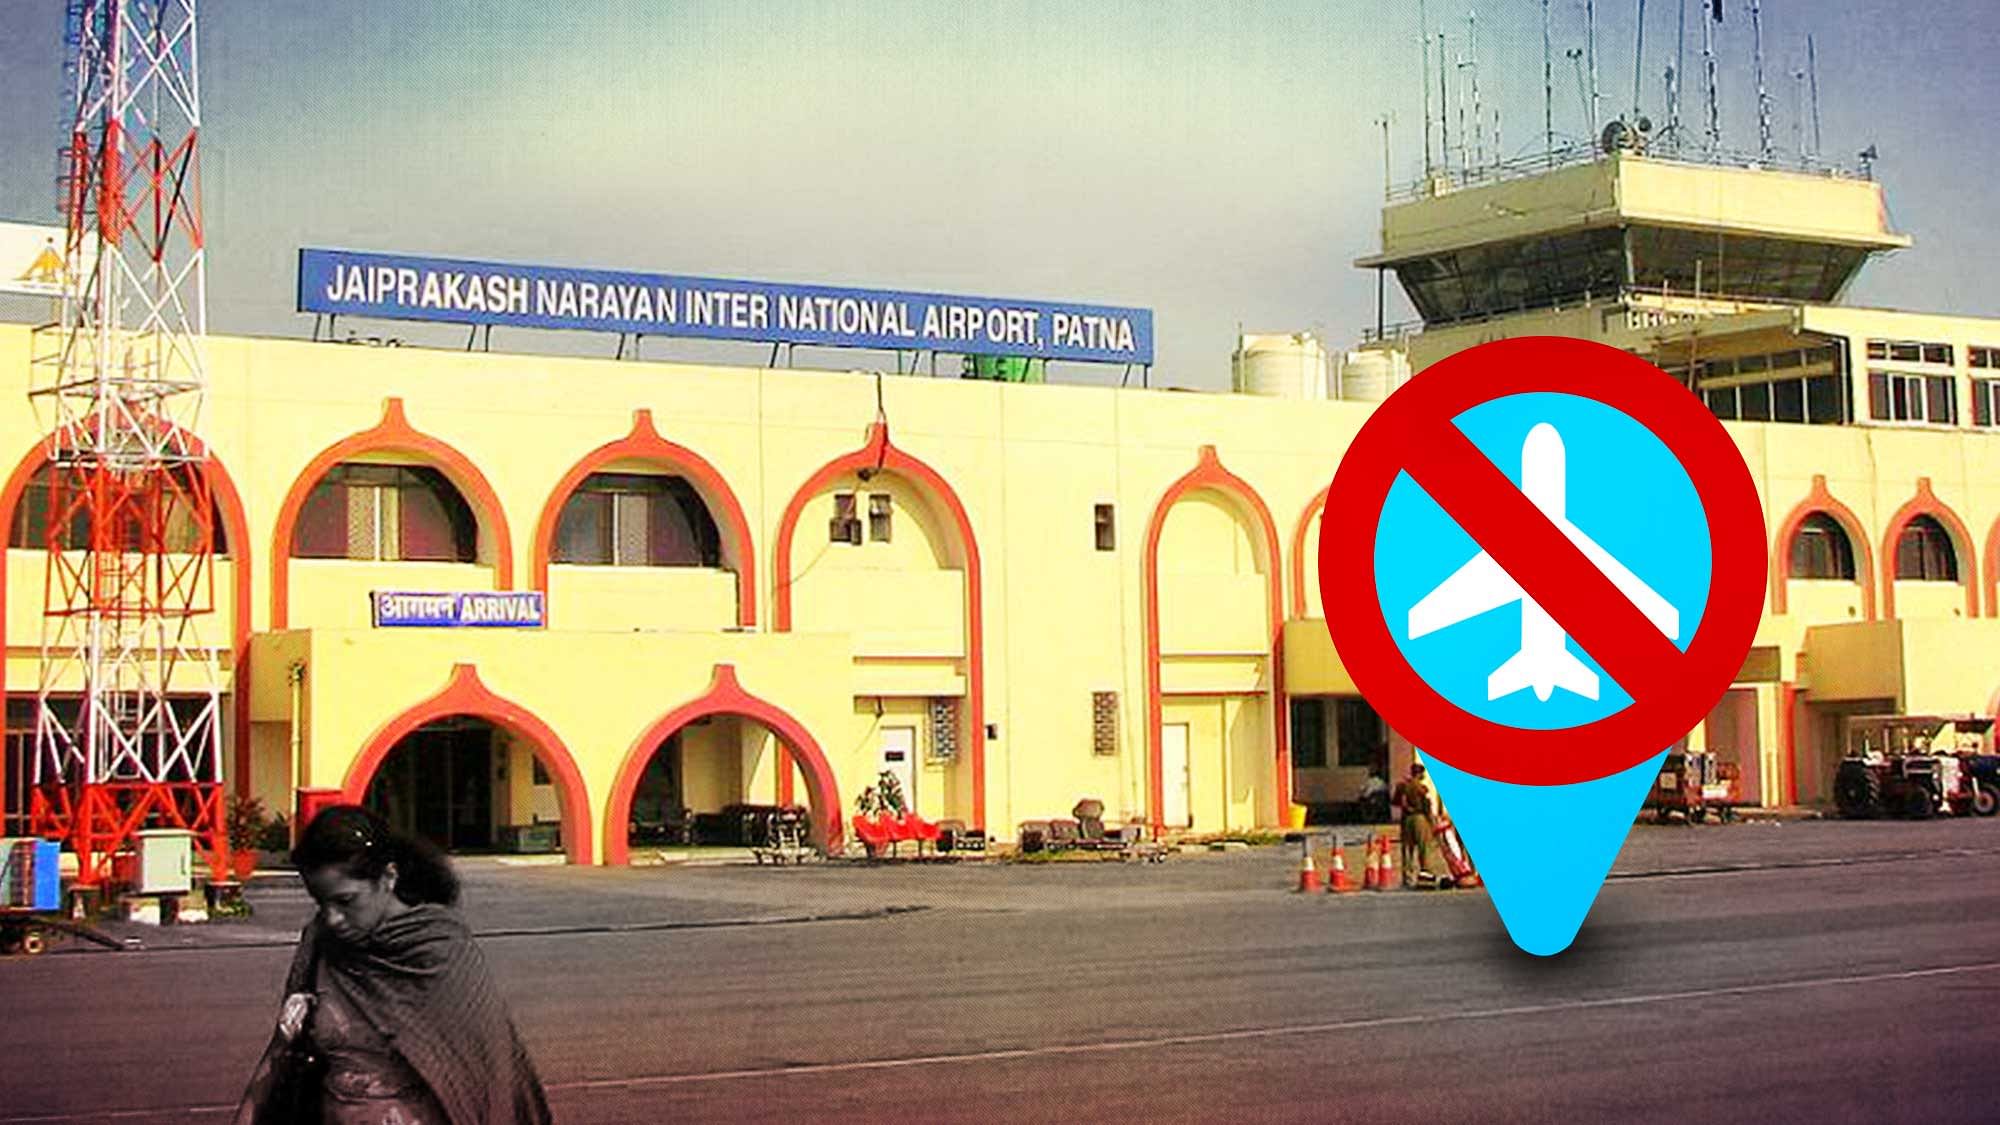 The non-compliance of certain norms may lead to the closure of the Patna International Airport. (Photo: <b>The Quint</b>)